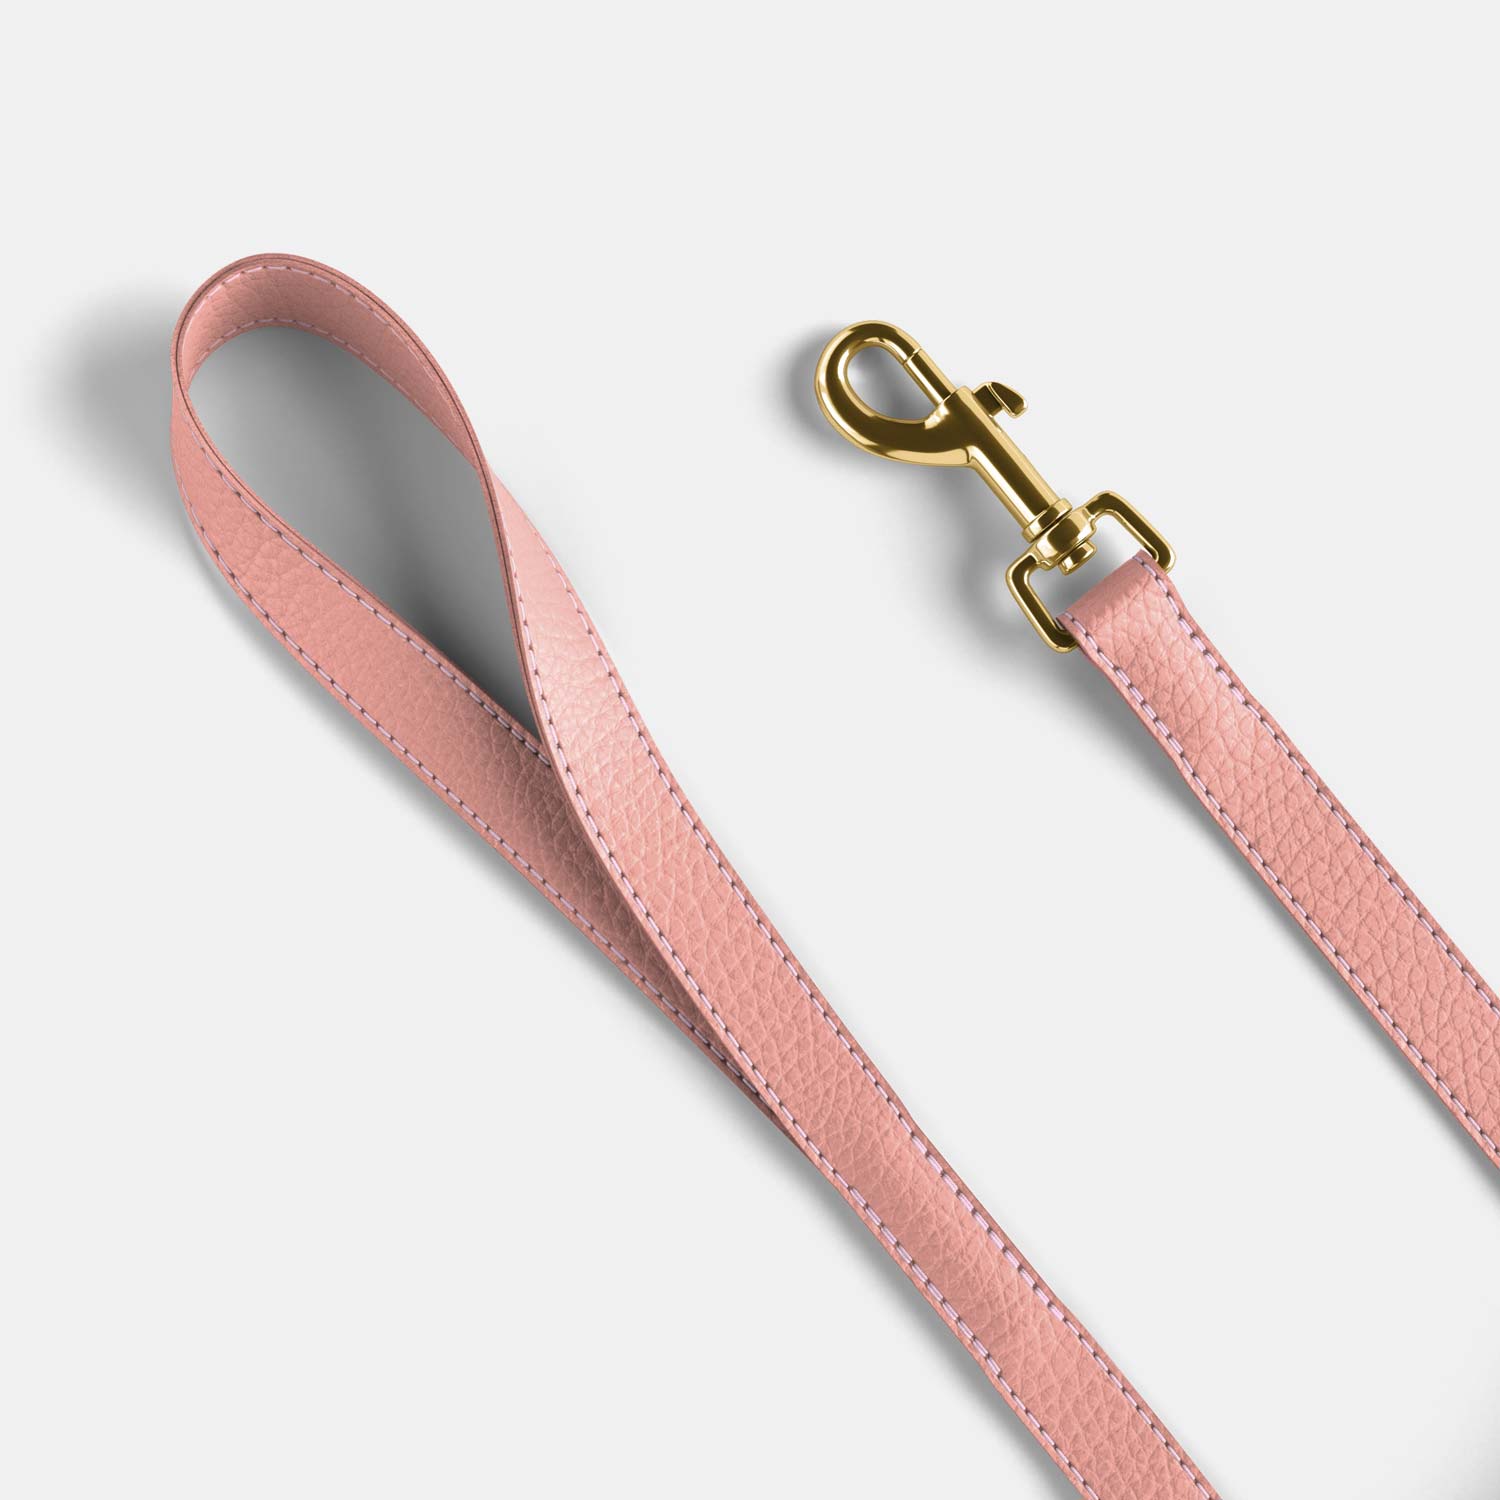 Leather Dog Collar - Grey and Coral - RYAN London